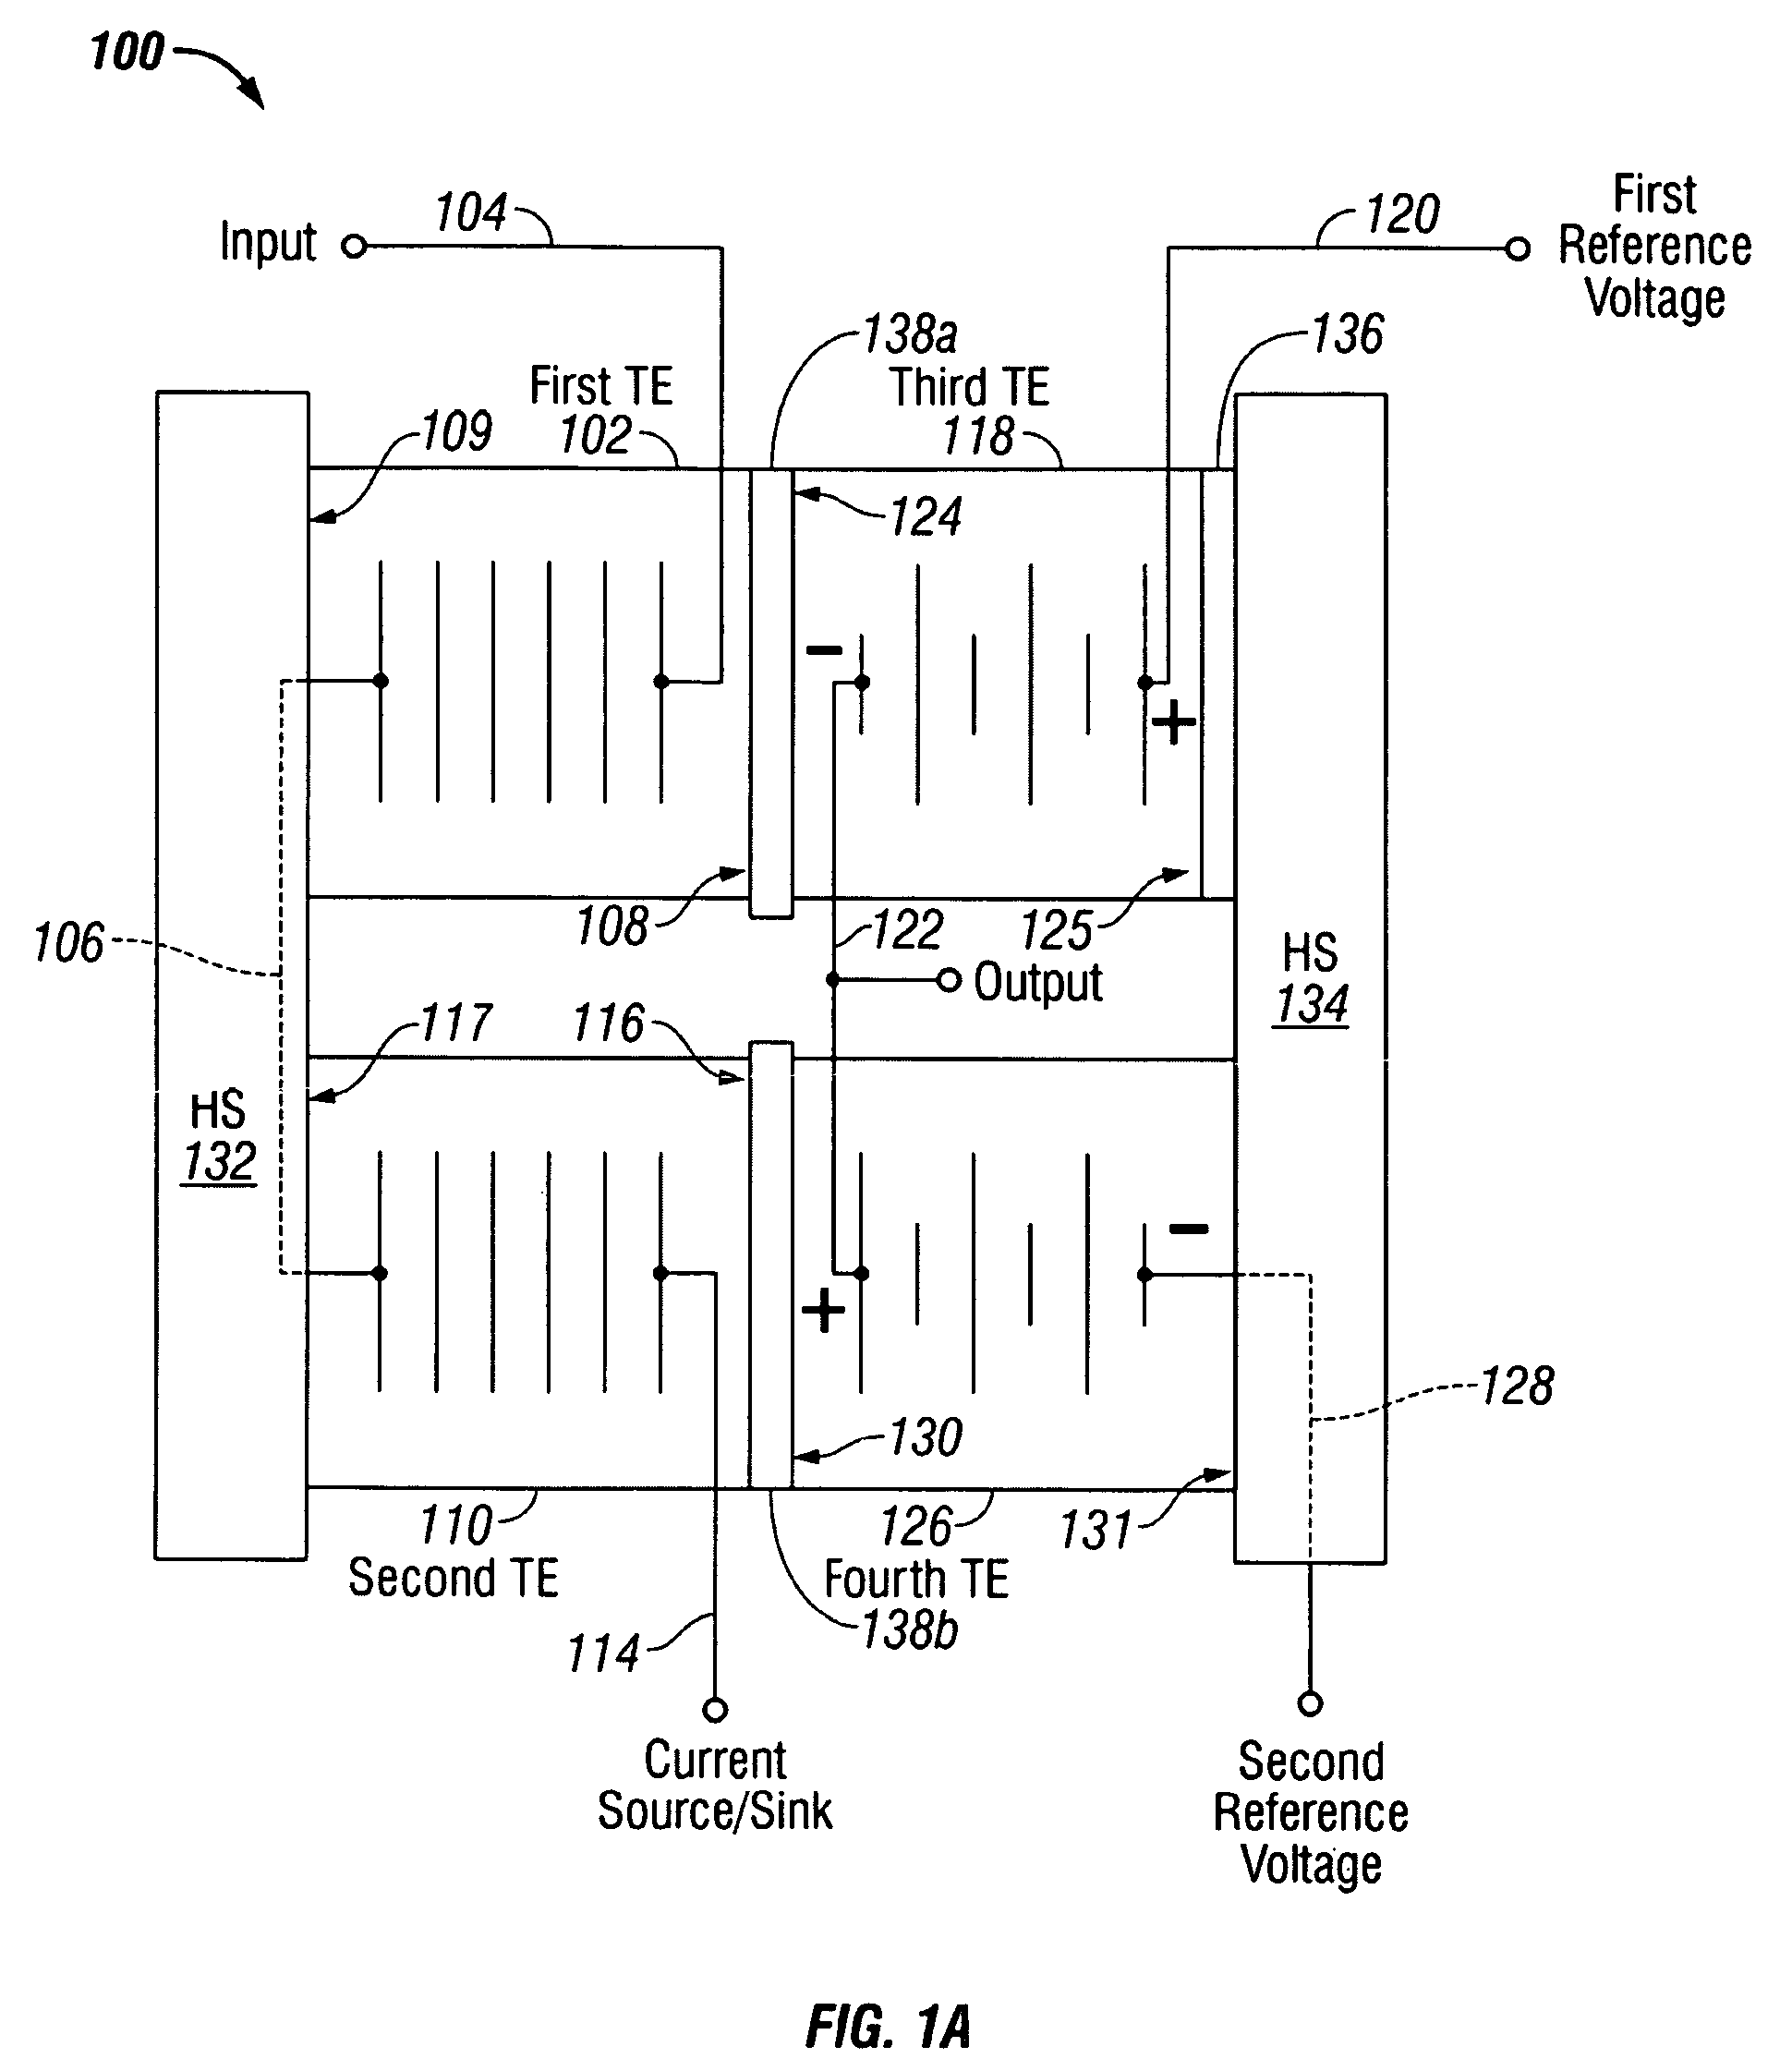 Thermal electric NOR gate